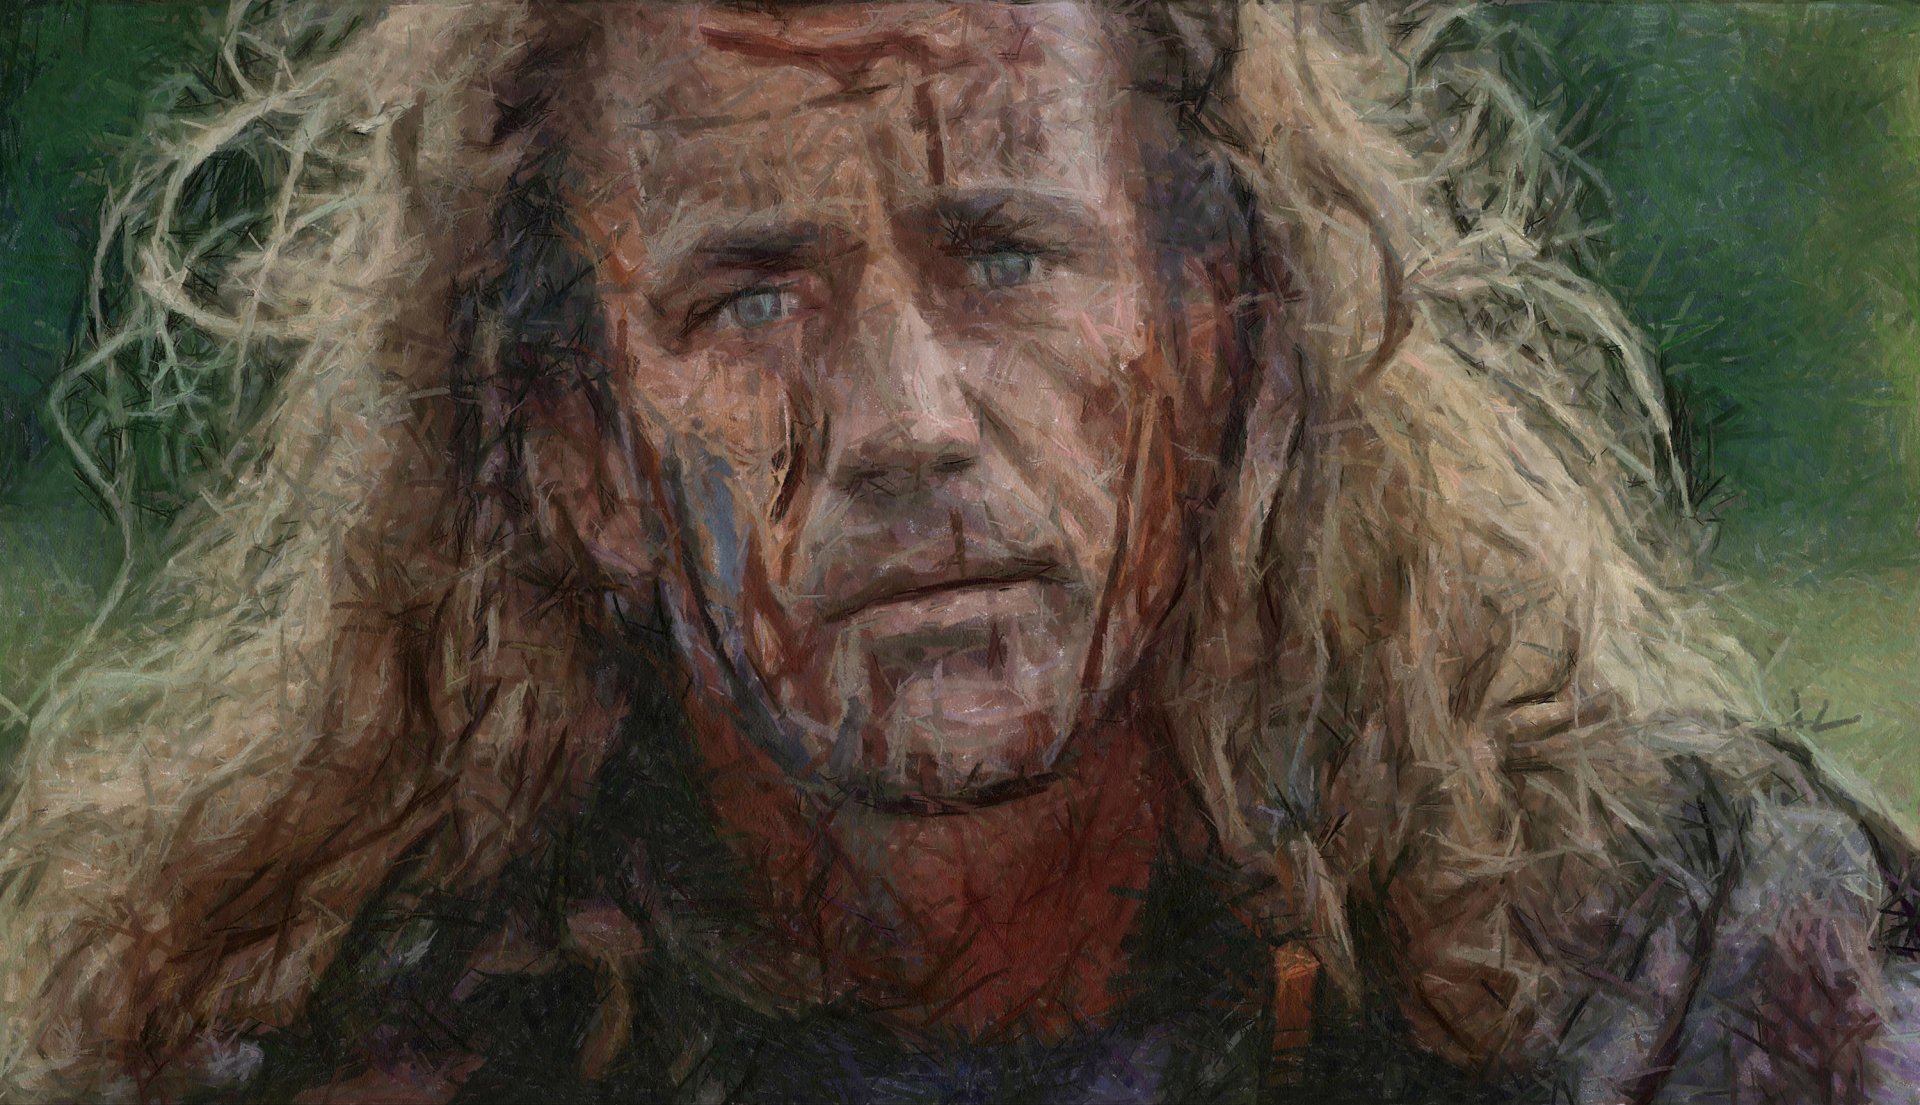 free download hollywood movie braveheart